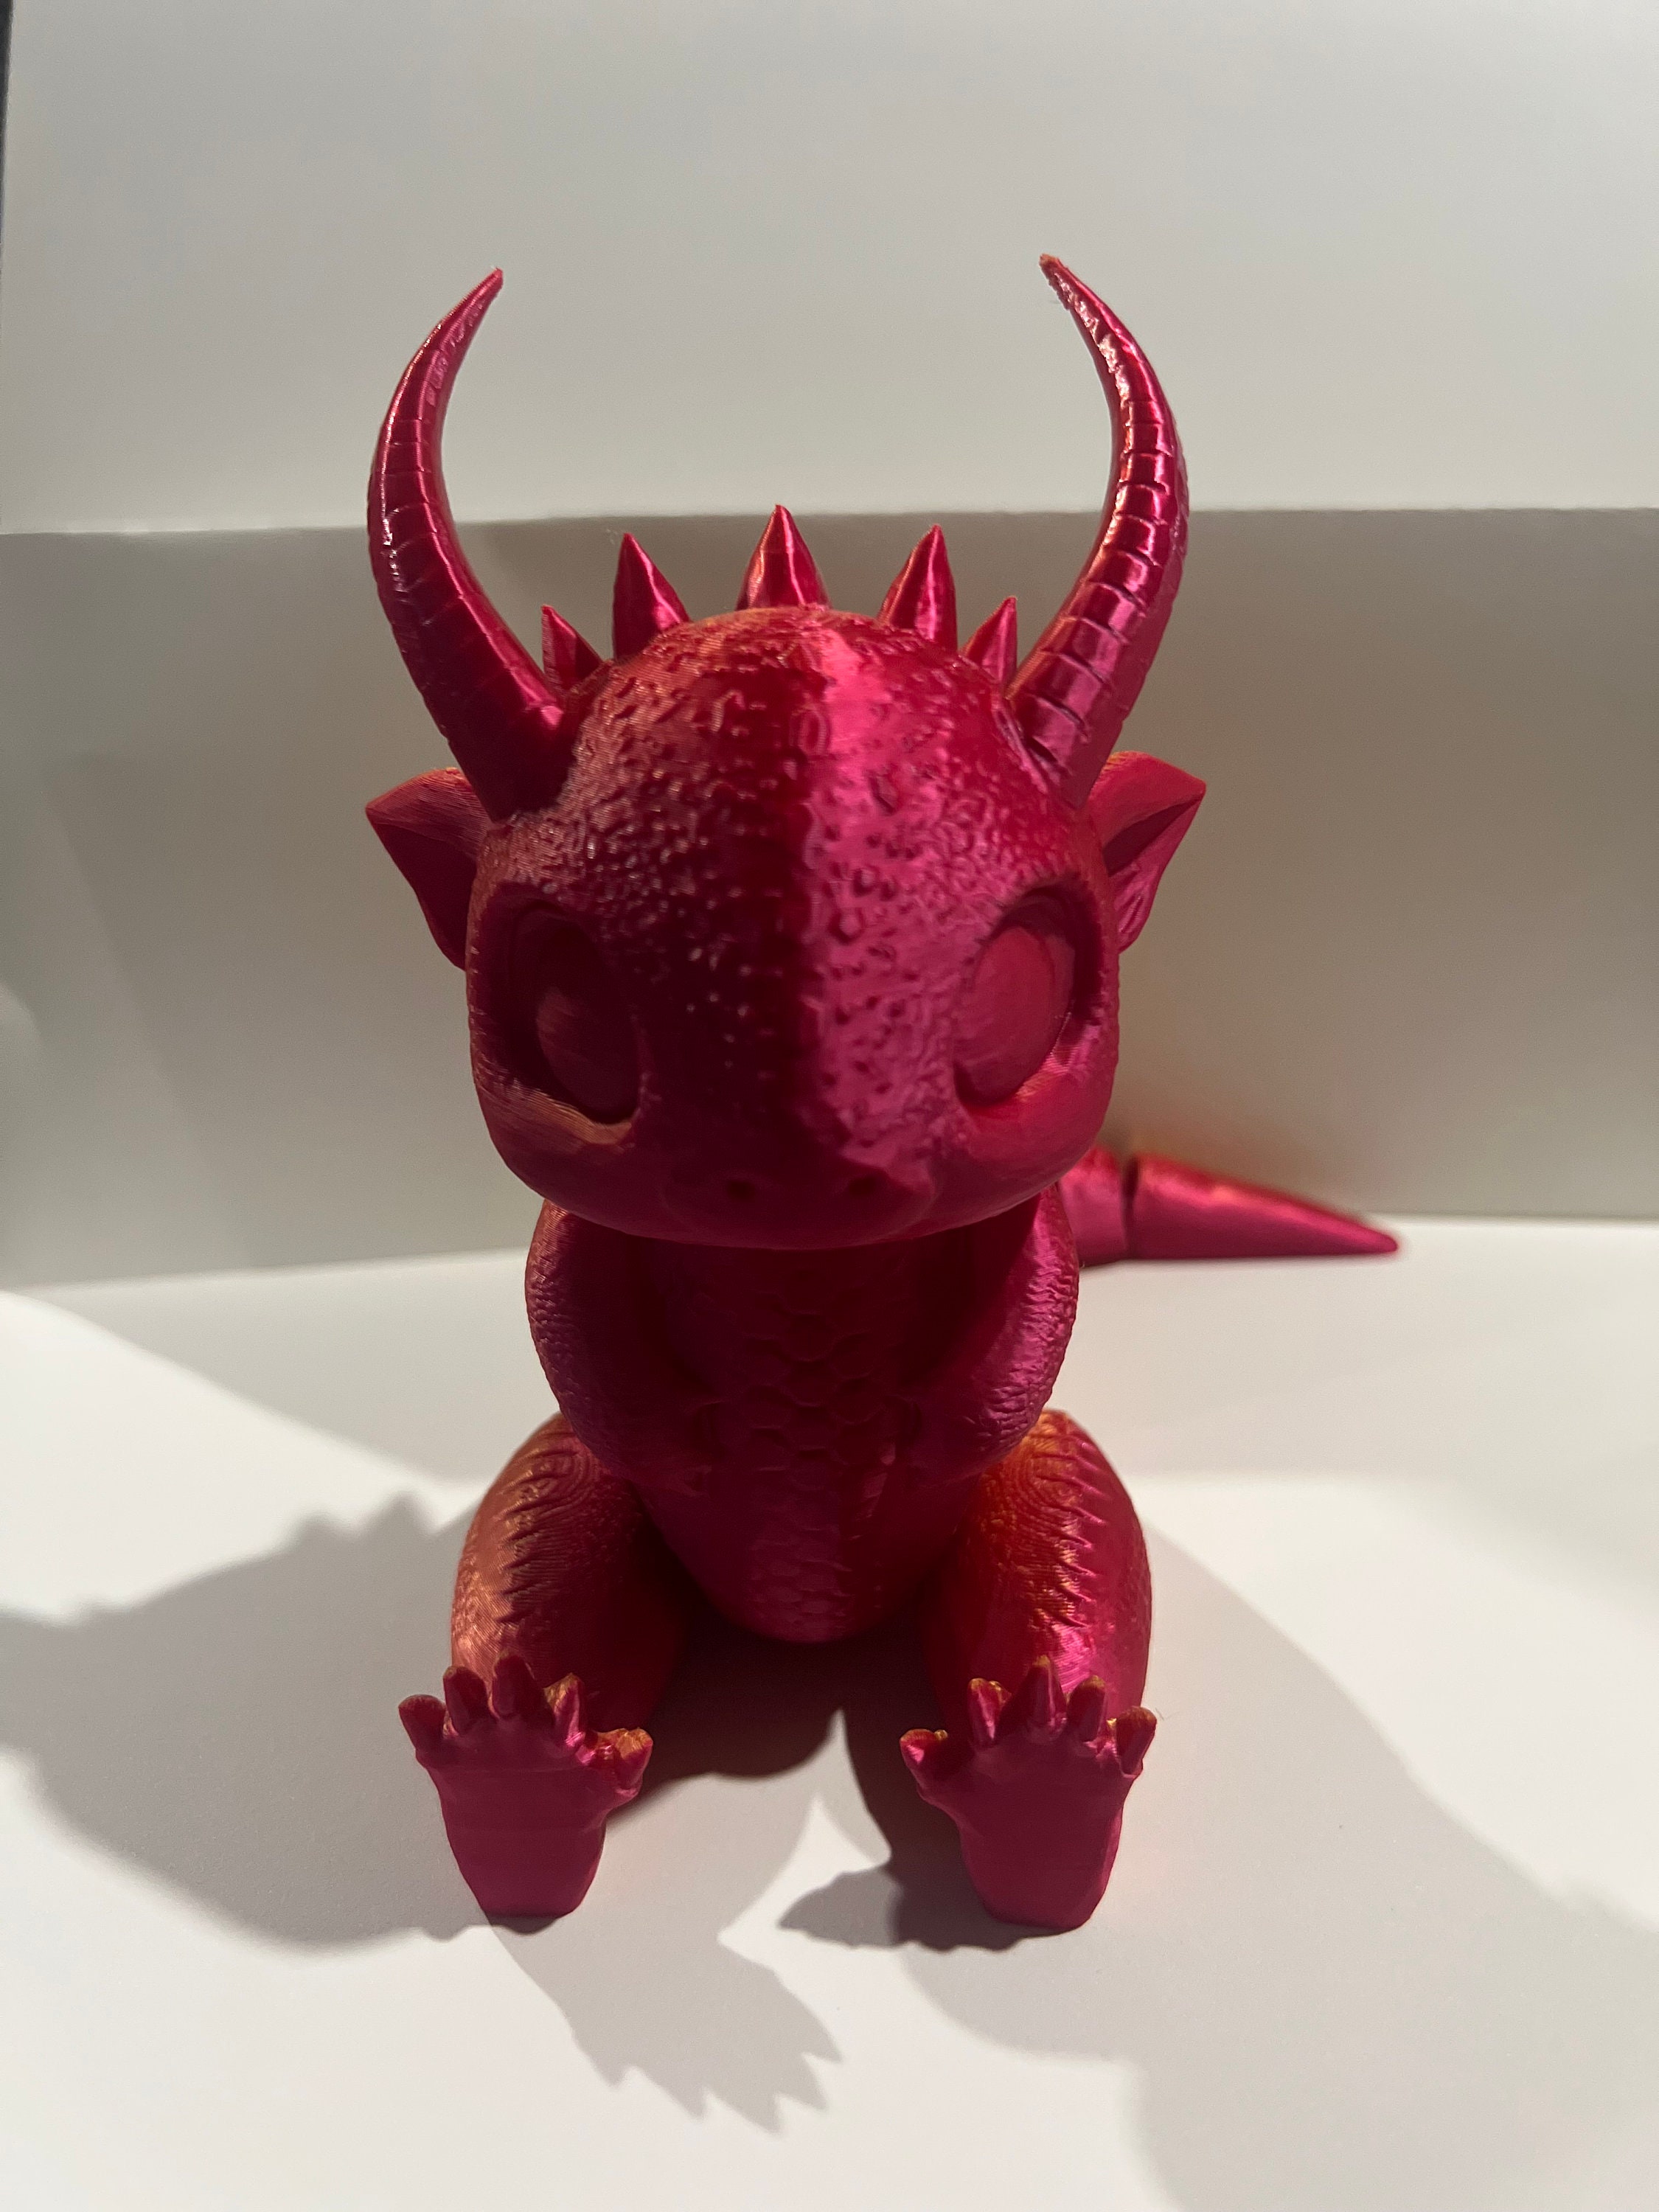 3D Printed Articulating Dragon 27 Inch Flexi Factory Exclusive Sea Dragon  Crystal Dragon Giant Flexible Fidget Toy Articulated Cinderwing 